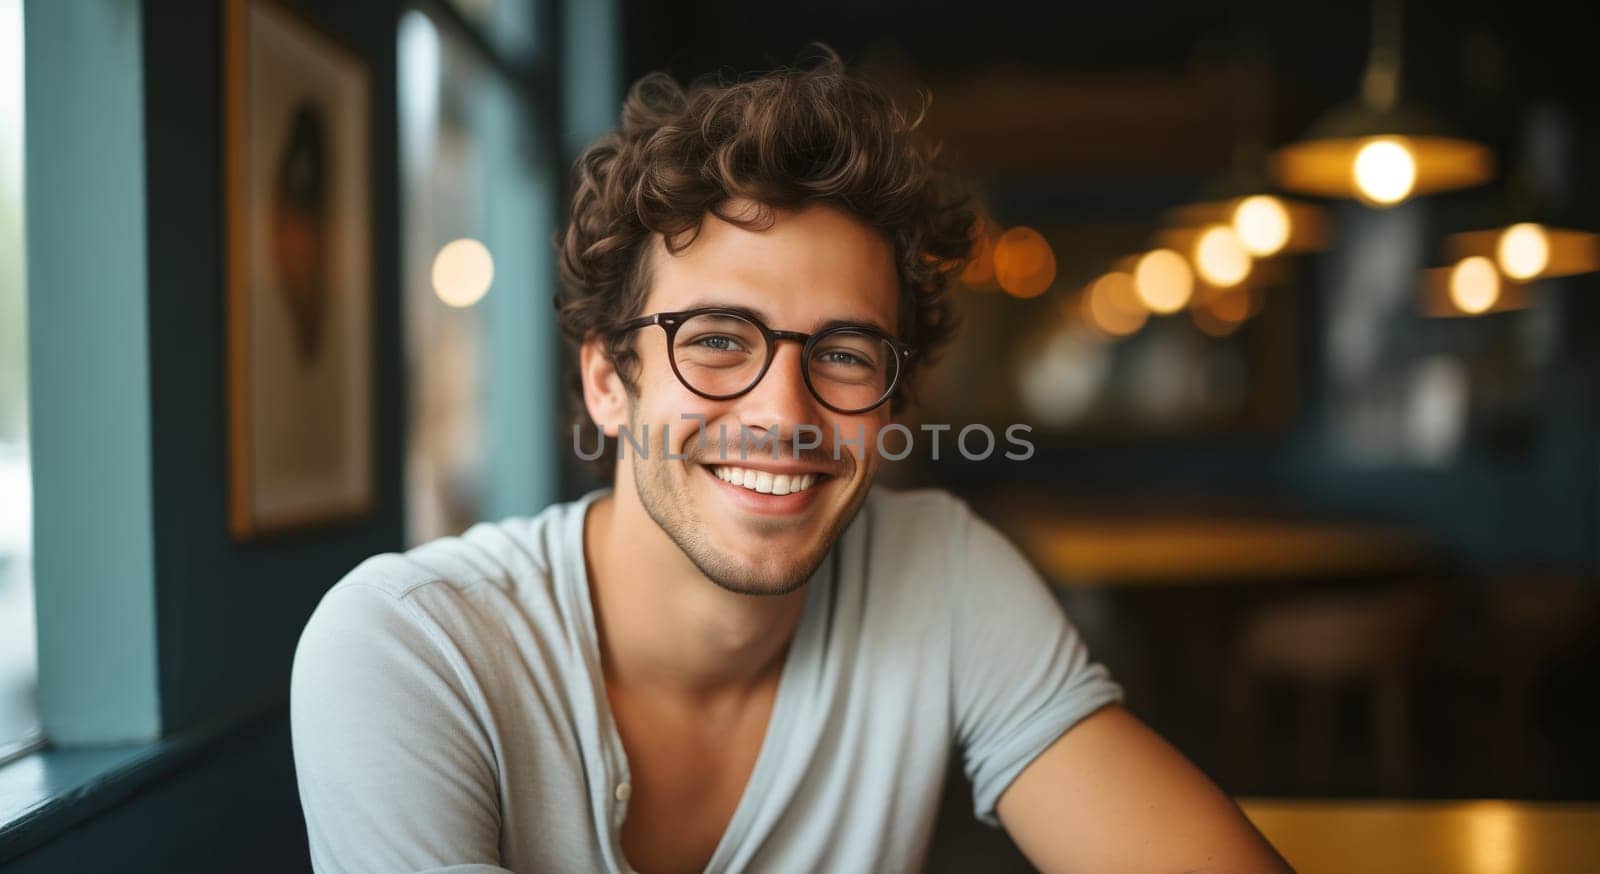 Portrait happy smiling young man client in coffee house or cafe, looking at camera by Rohappy